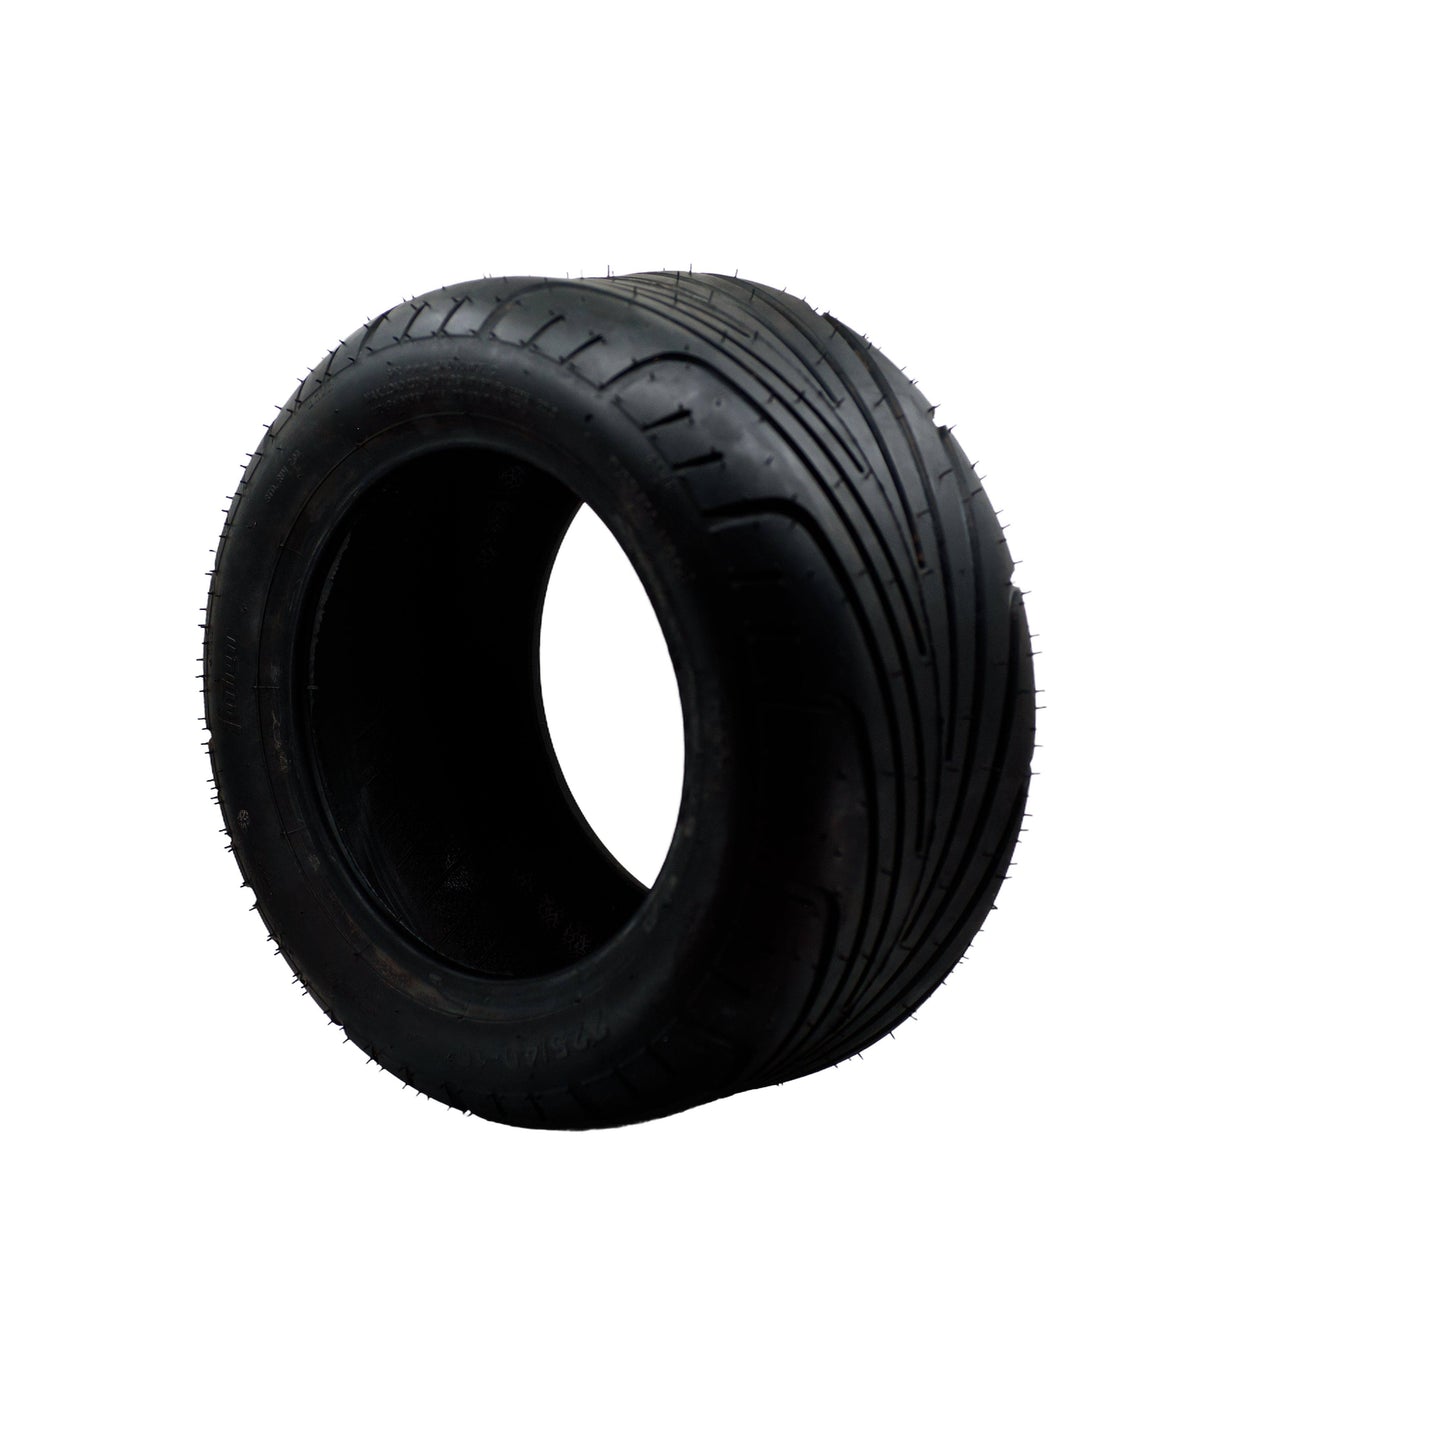 Tyre for Labicana Max v1.1 - FatWheelScoot